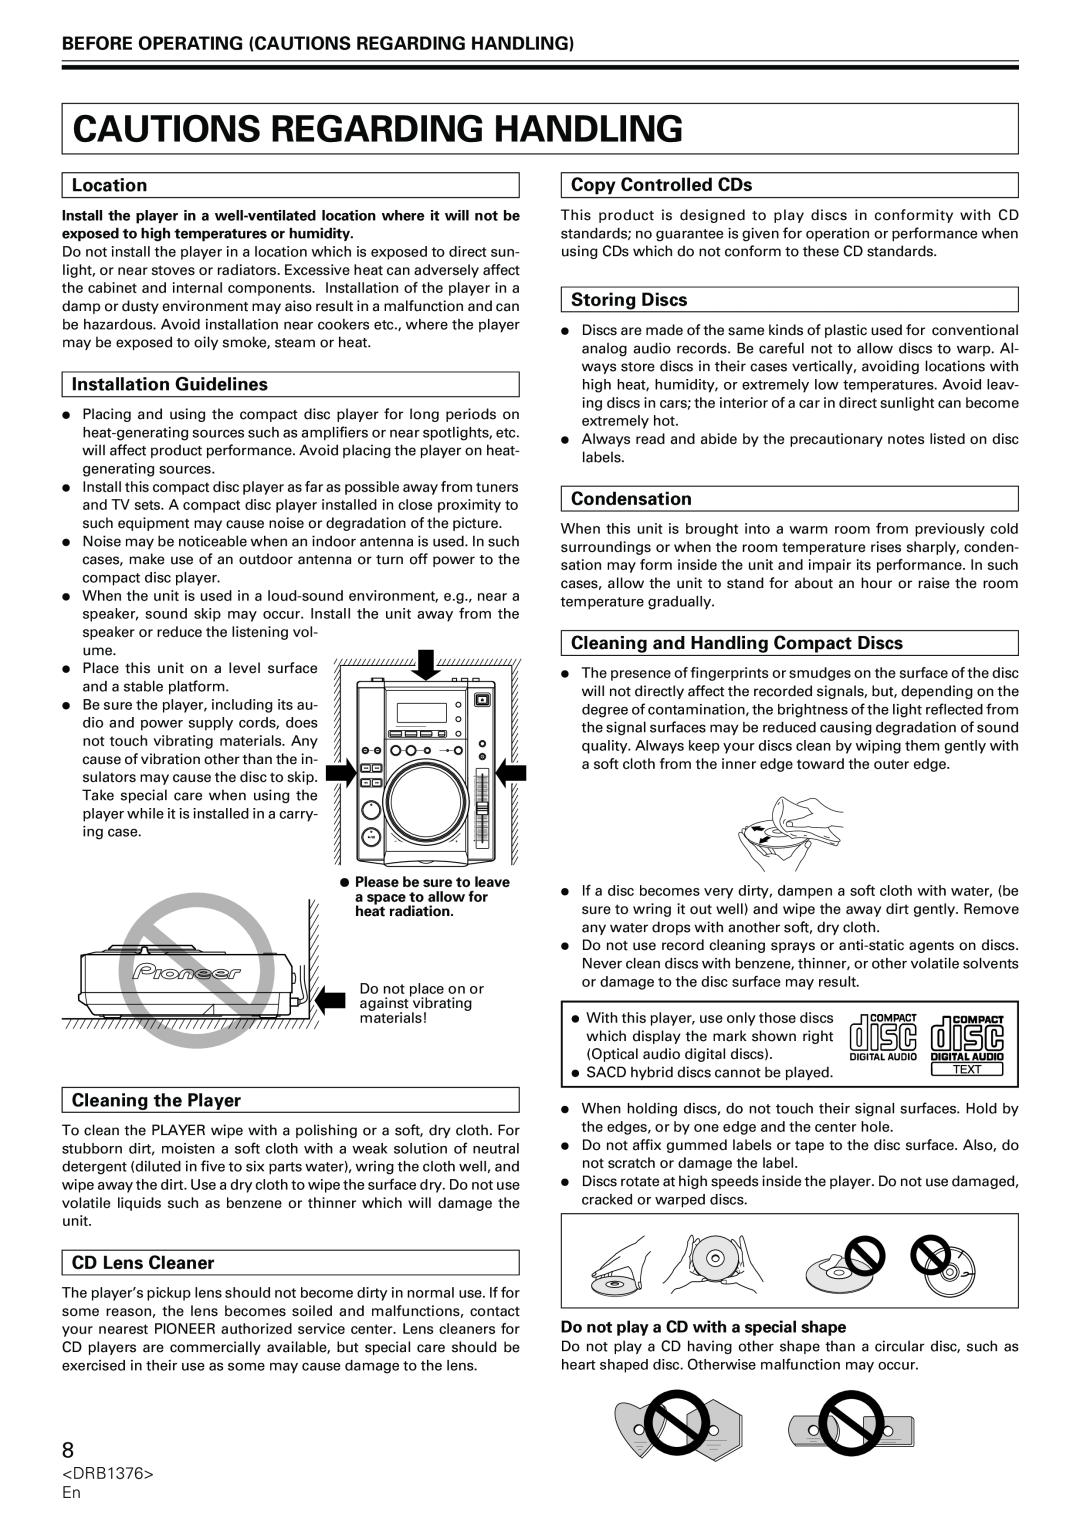 Pioneer CDJ-200 Before Operating Cautions Regarding Handling, Location, Installation Guidelines, Cleaning the Player 